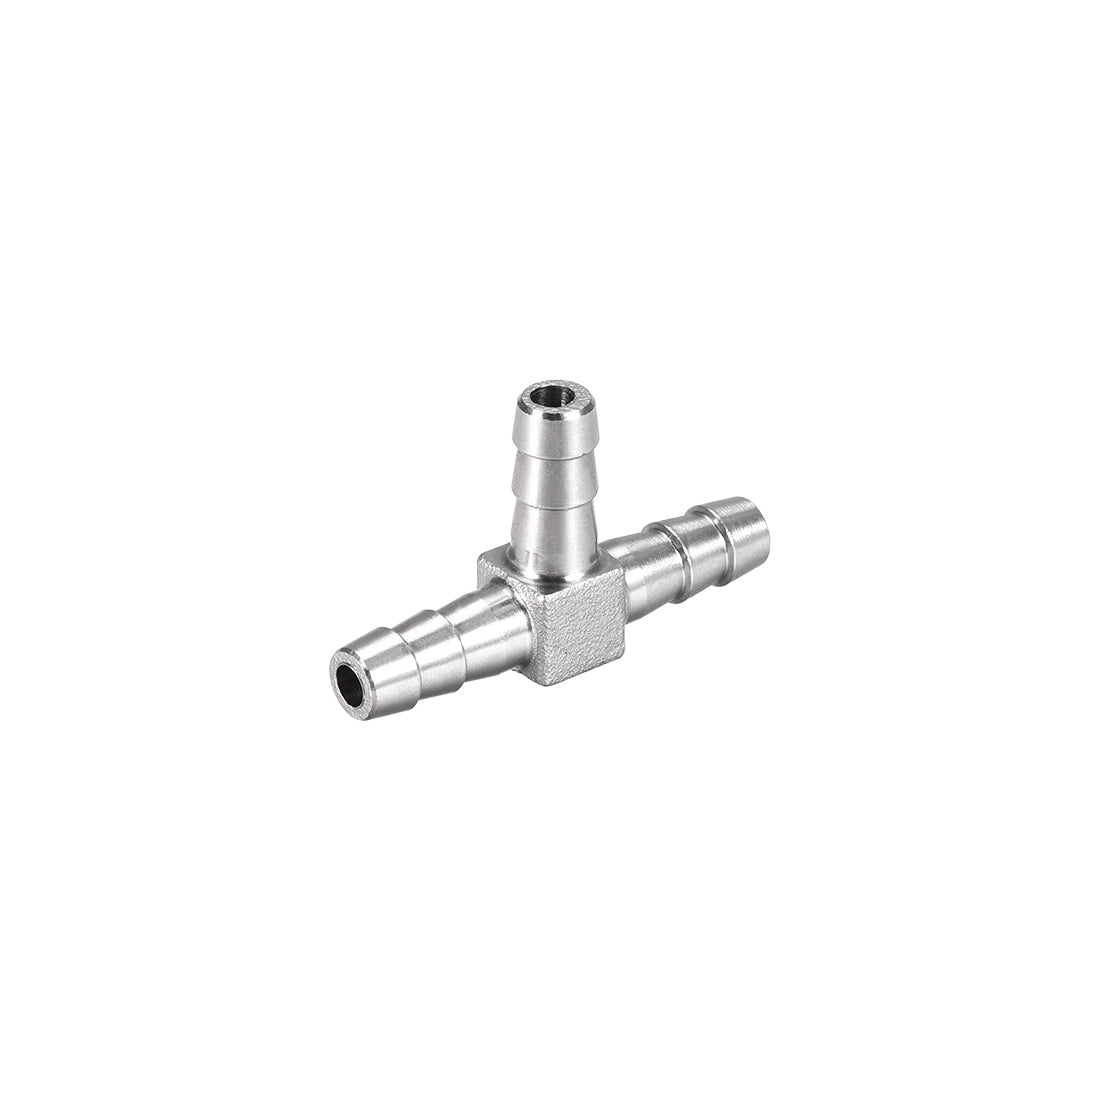 uxcell Uxcell 1/4-Inch (6mm) Hose ID Barb Fitting Stainless Steel 3 Way T Shaped Union Home Brew Fitting